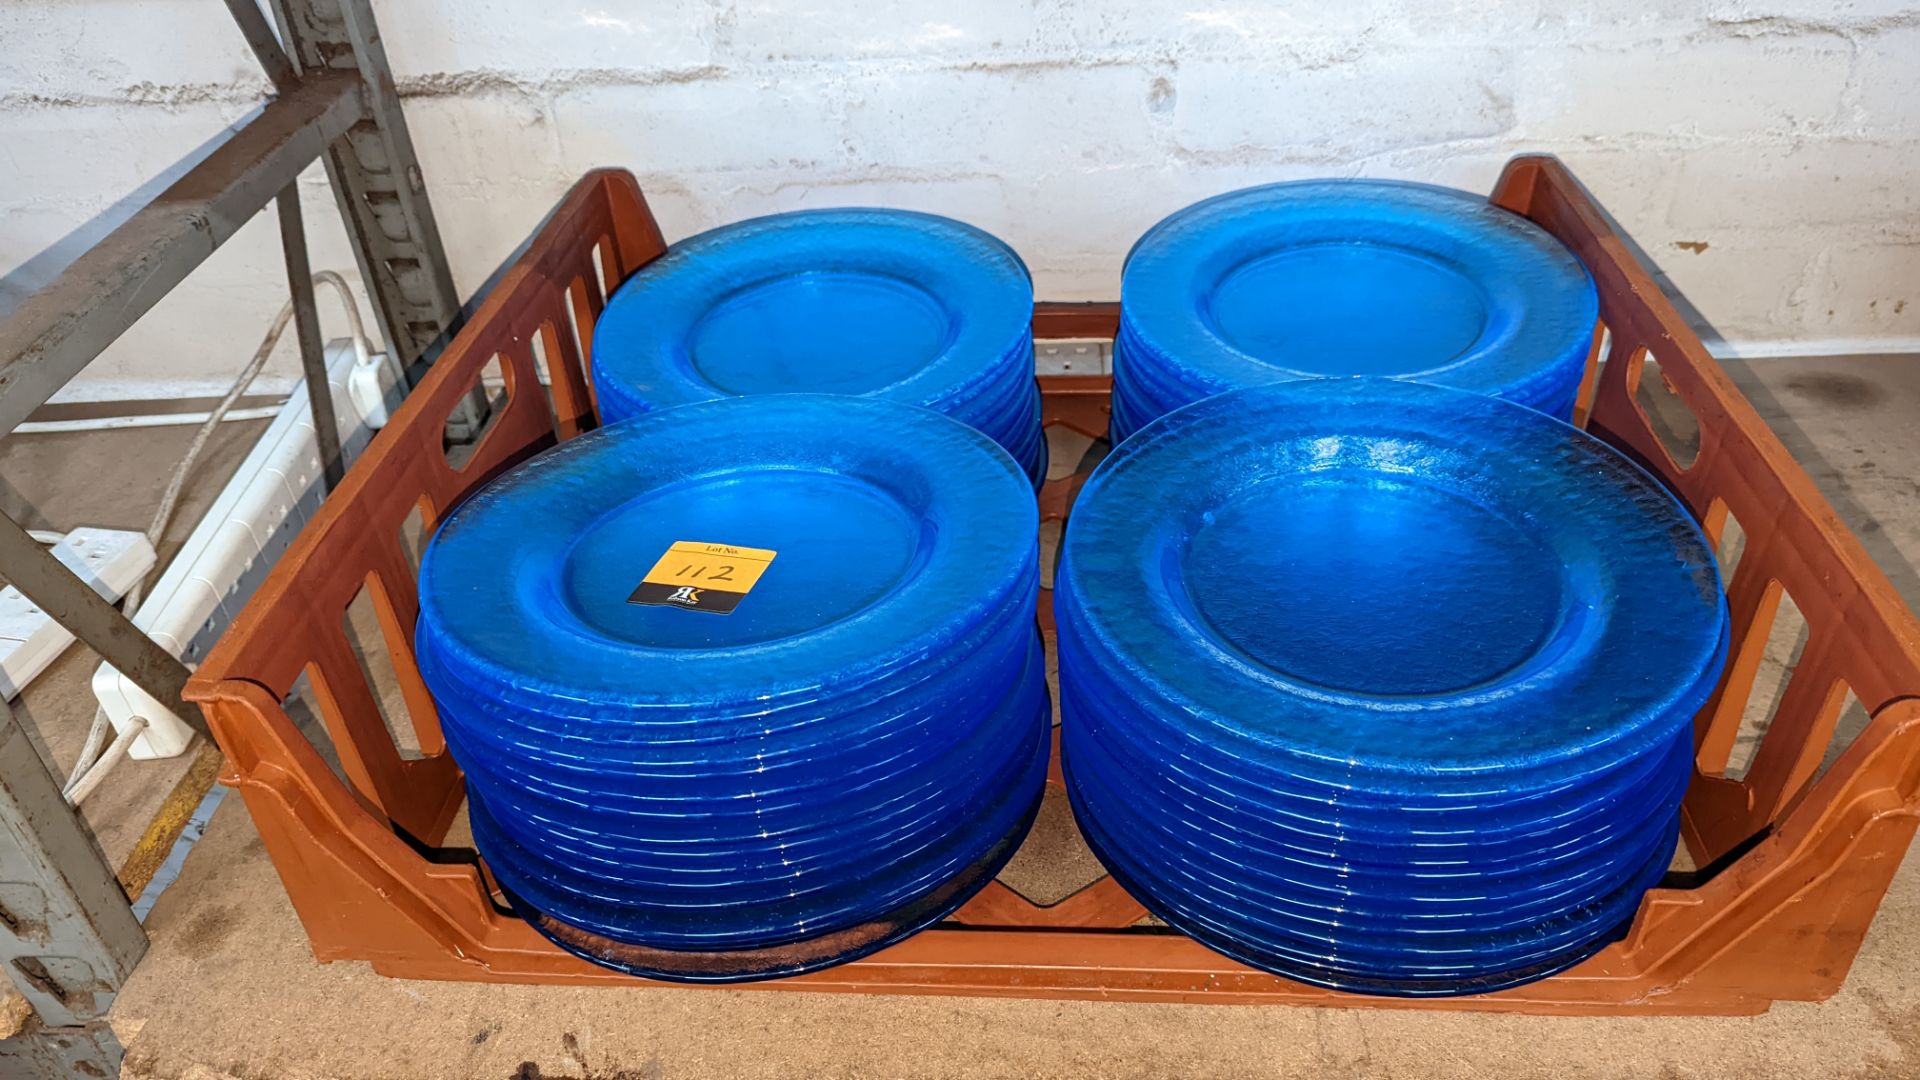 60 off blue glass plates each measuring approximately 26cm diameter